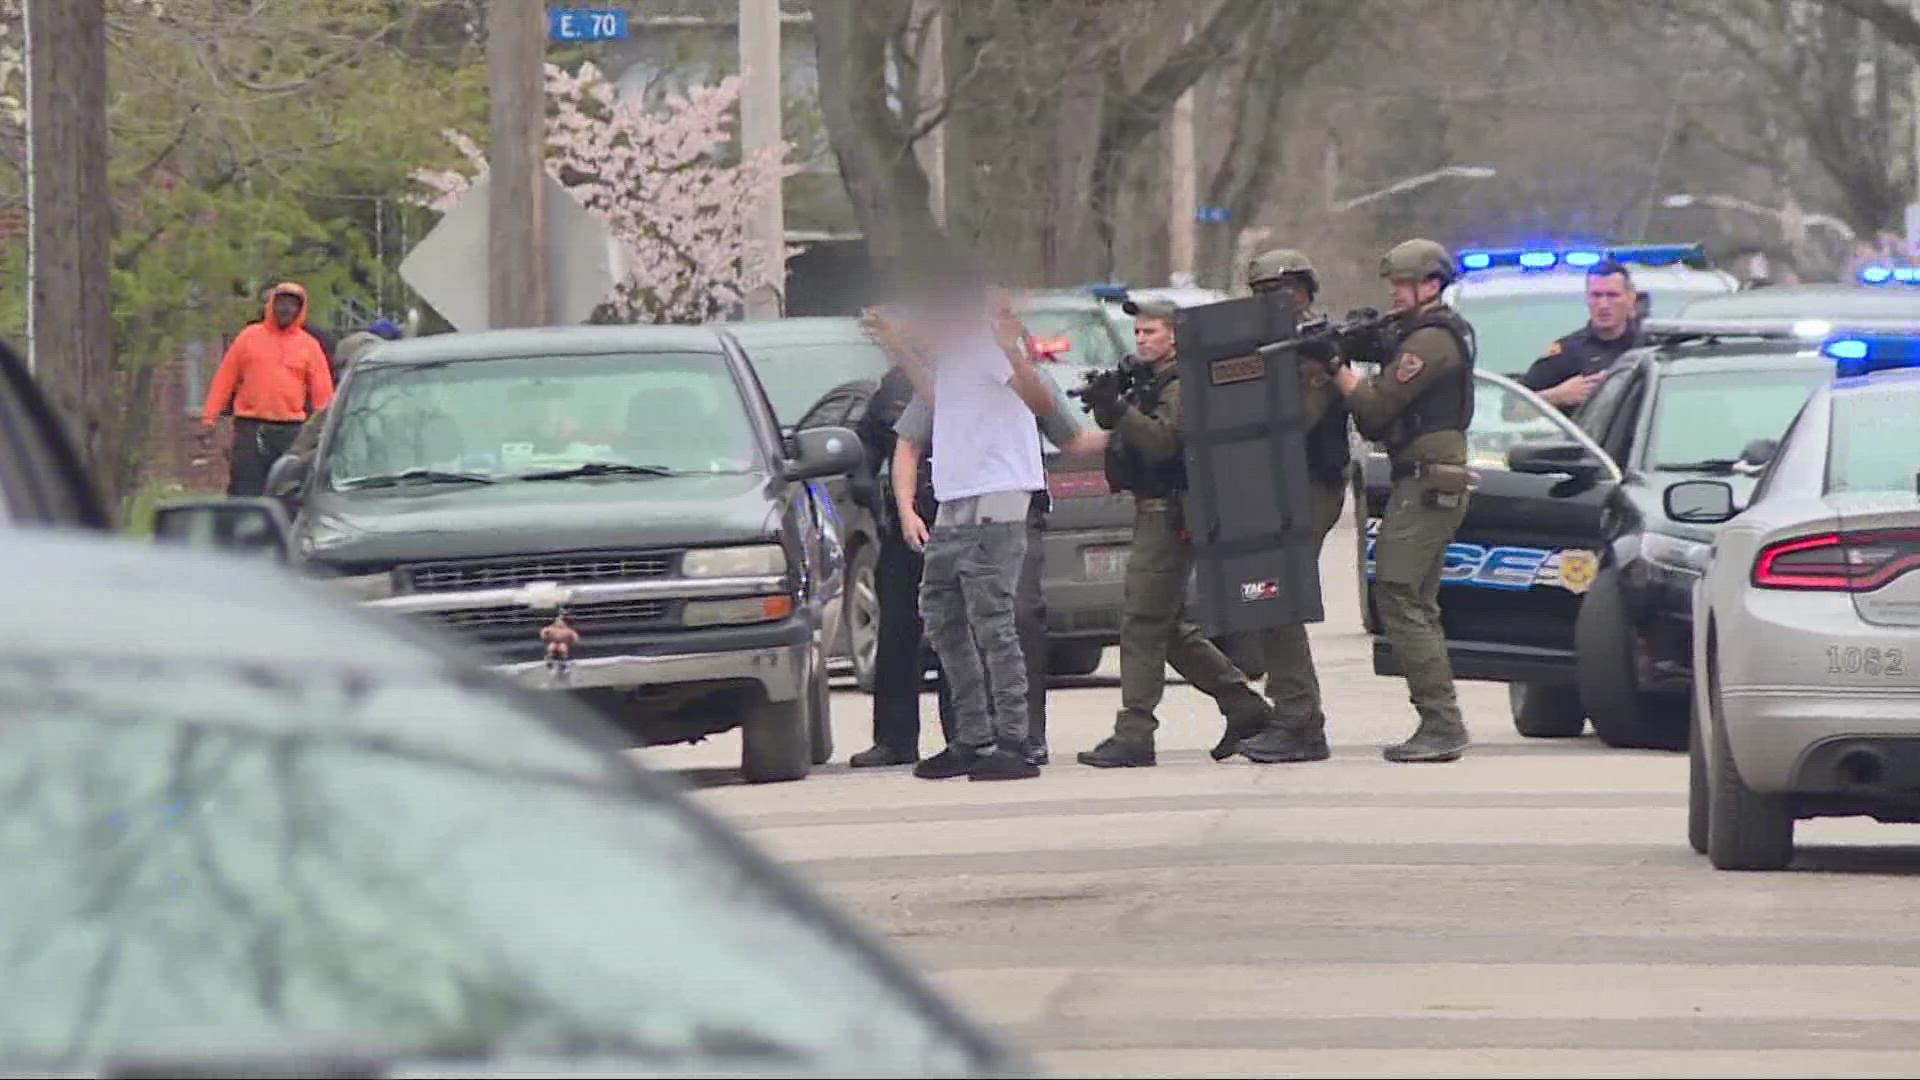 A chase involving multiple law enforcement agencies ended on Cleveland's eastside this evening with one man in custody.